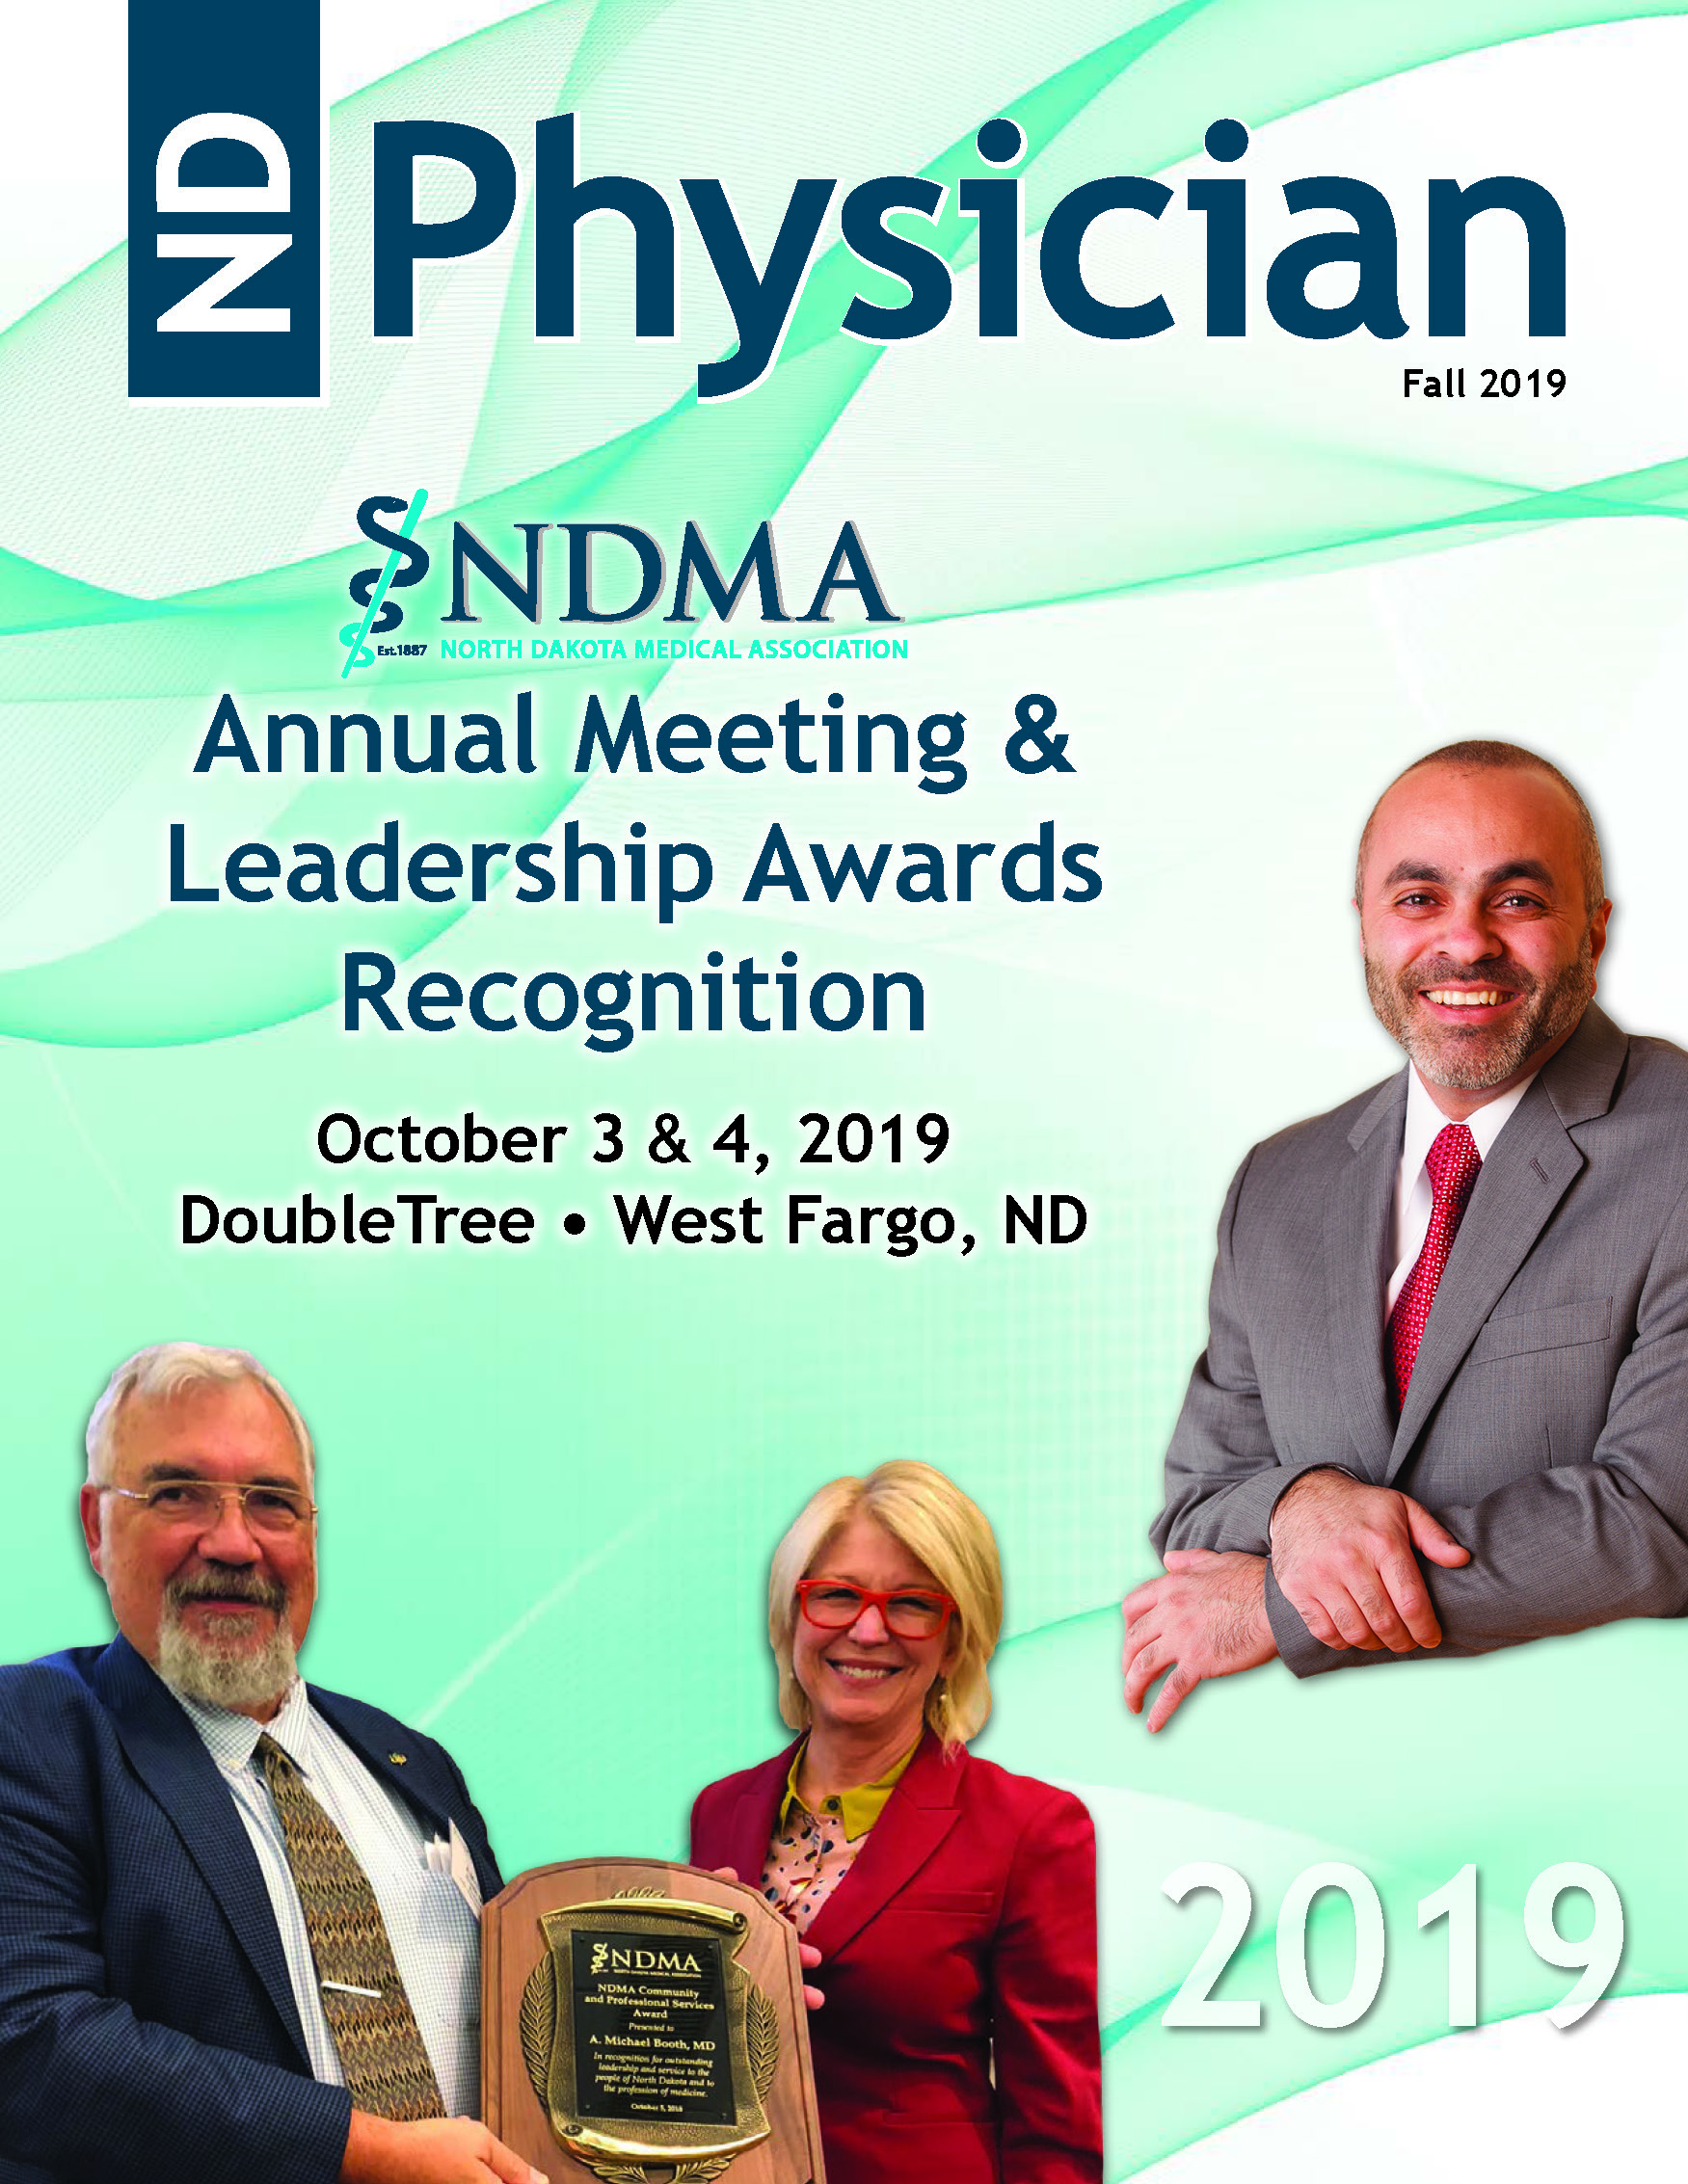 ND Physician Fall 2019 - Annual Meeting Edition magazine cover